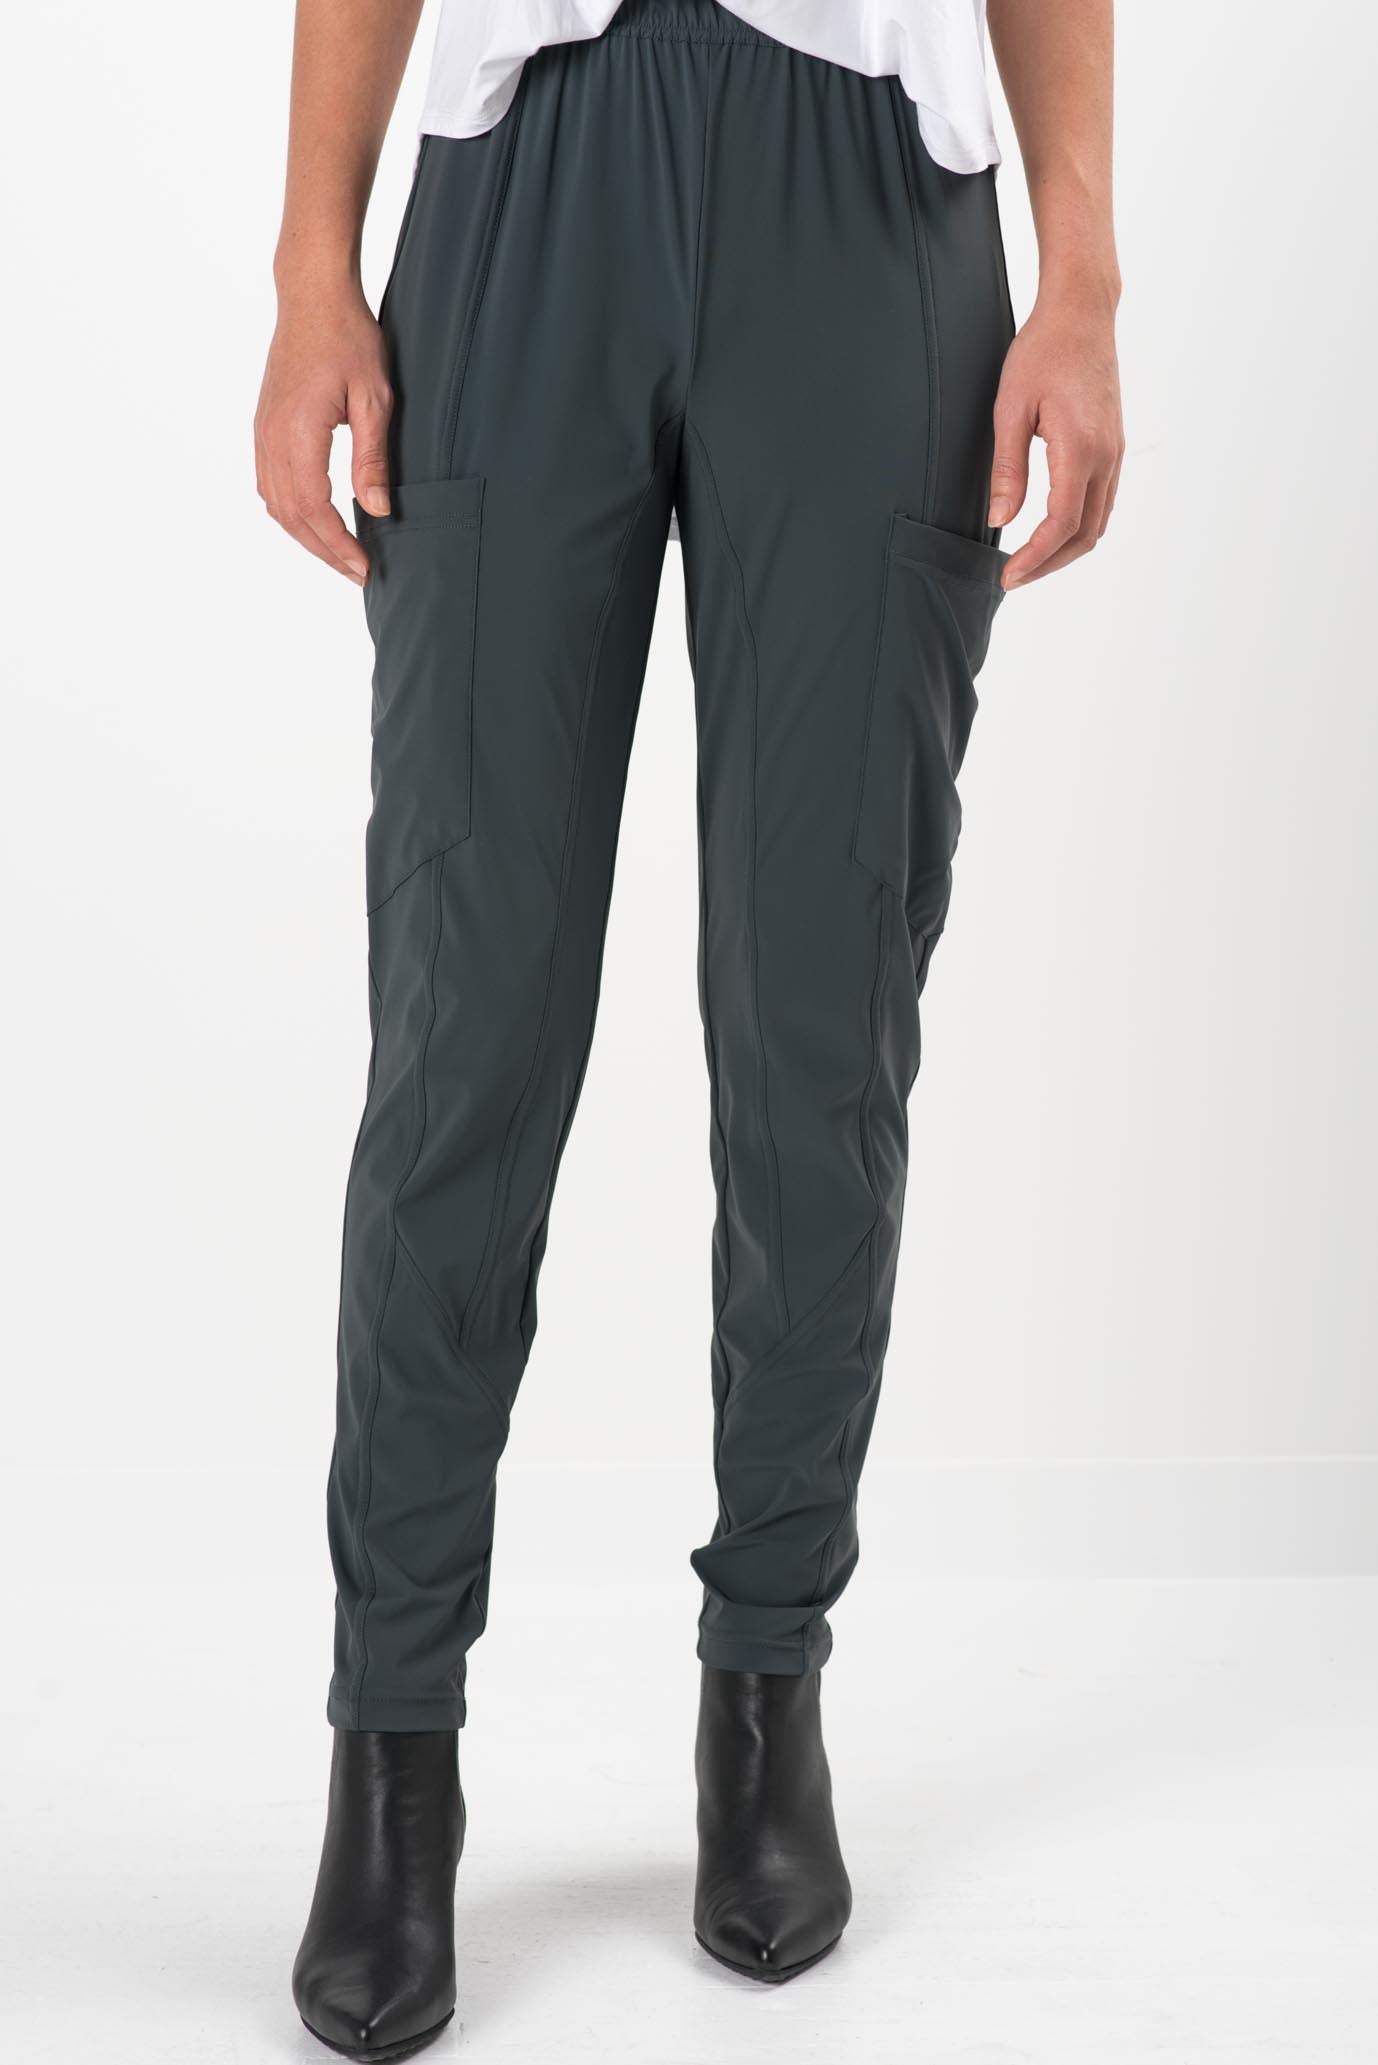 The Cargo Pants That Will Surprise